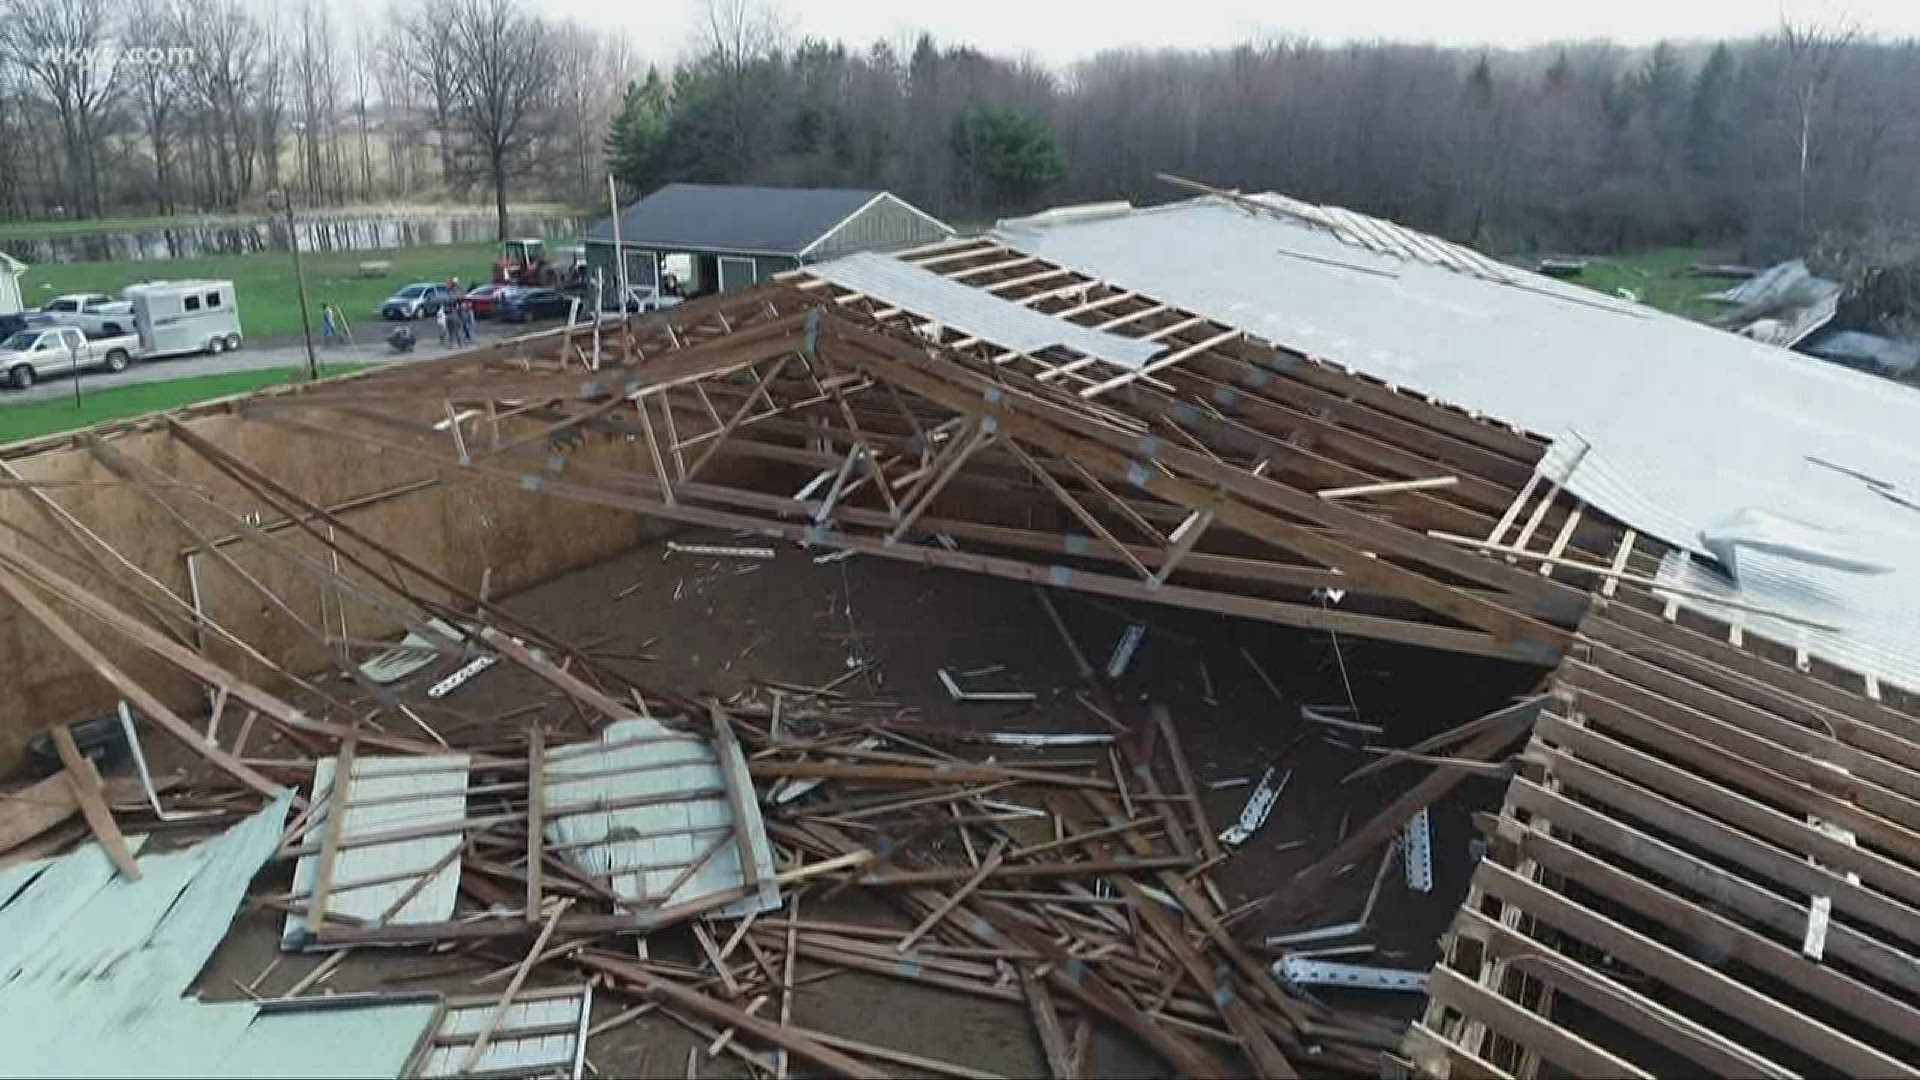 Residents across Northeast Ohio were tasked with cleaning up after severe storms hit the area. Residents faced high winds,hail, heavy rain and even tornadoes.